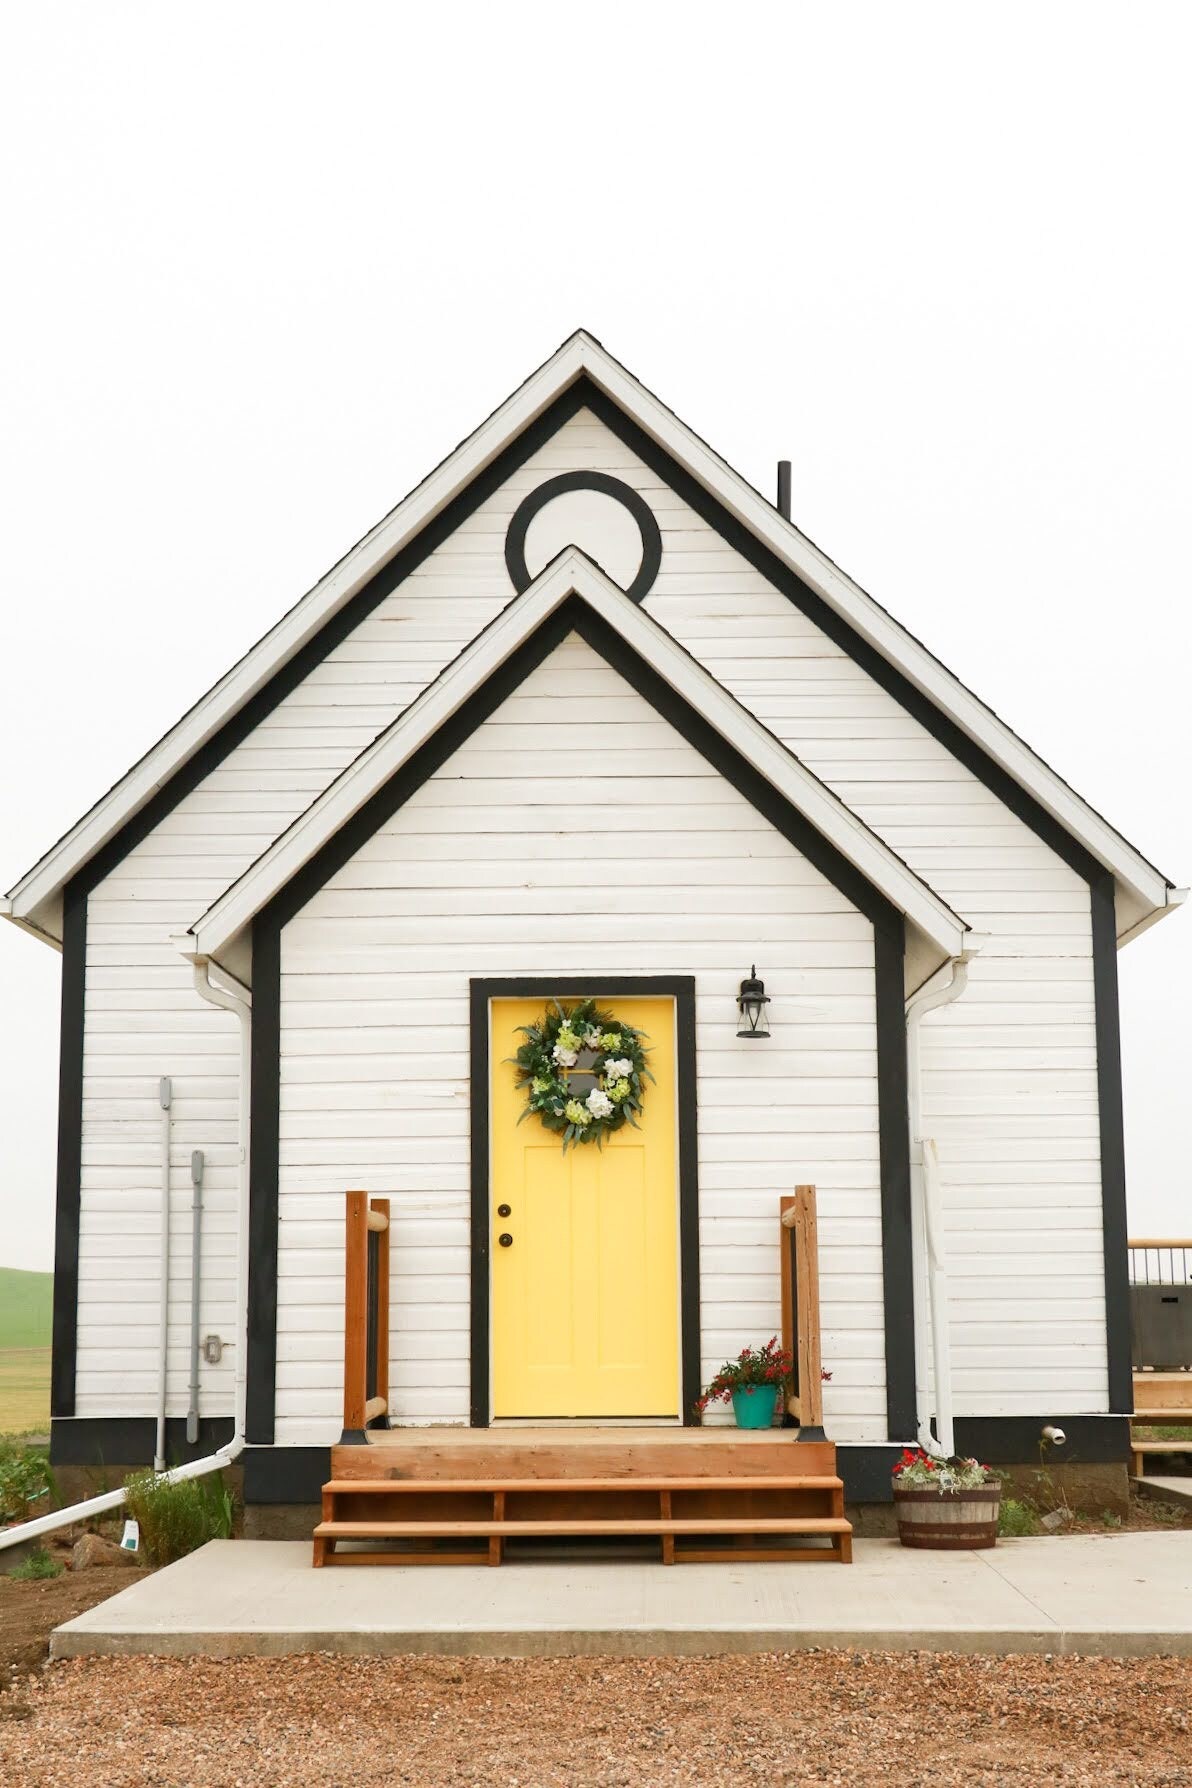 This postcard-perfect remodeled schoolhouse in the middle of prairie flatland and farms is quintessentially old world Saskatchewan. The one-room countryside property is best suited for families or close friends who don’t mind sharing the cozy living space as one of the two beds is actually a pull-out couch. Although this property has a laundry list of sweet amenities—including complimentary breakfasts and handmade quilts—the best part of this charming country getaway is the frequent appearance of the elusive northern lights that dance across the flat skyline. $132, Airbnb (Starting Price). <a href="https://www.airbnb.com/rooms/51668756">Get it now!</a><p>Sign up to receive the latest news, expert tips, and inspiration on all things travel</p><a href="https://www.cntraveler.com/newsletter/the-daily?sourceCode=msnsend">Inspire Me</a>